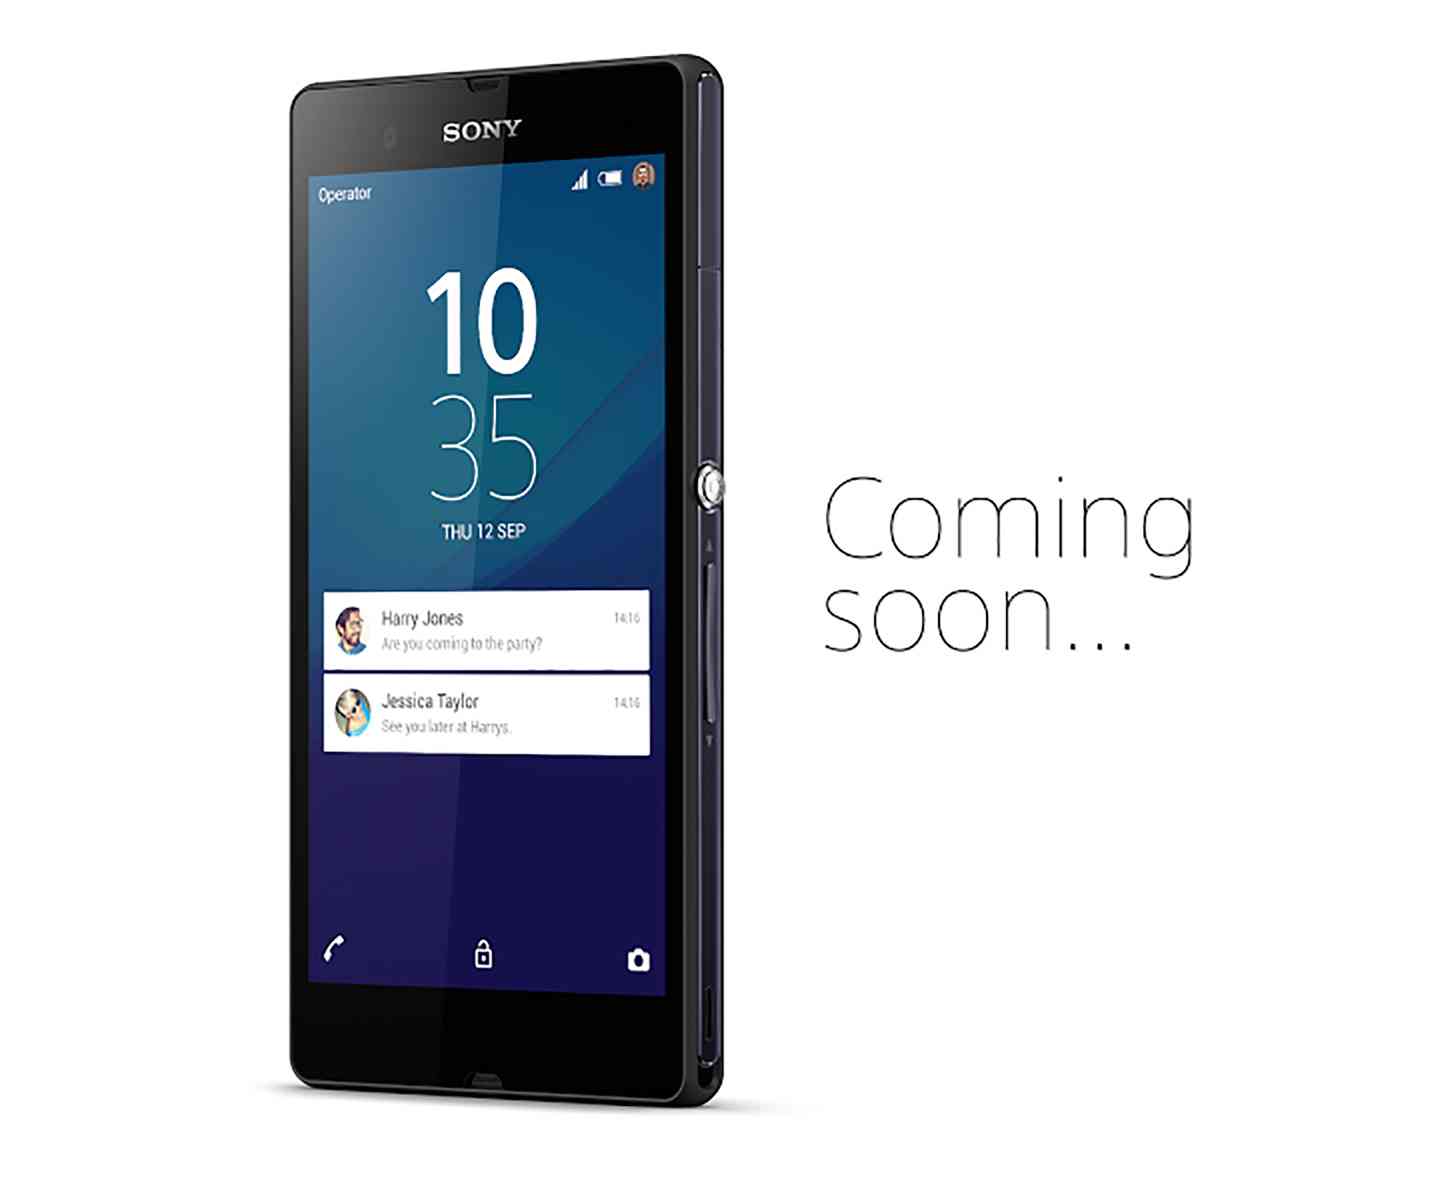 Sony Xperia Z Android 5.0 Lollipop